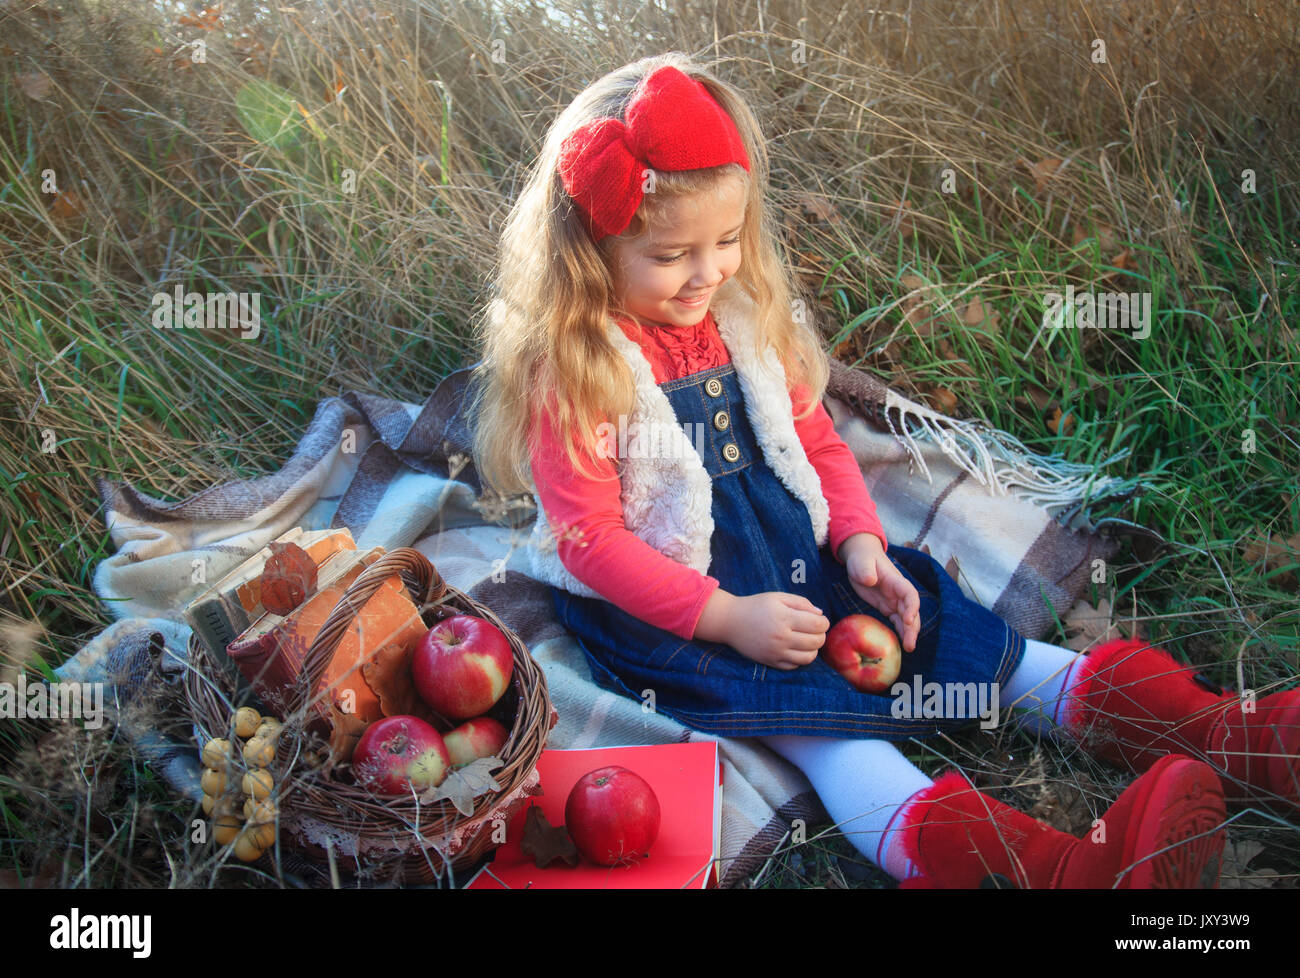 Little girl on nature with a basket of fruit and books. Stock Photo